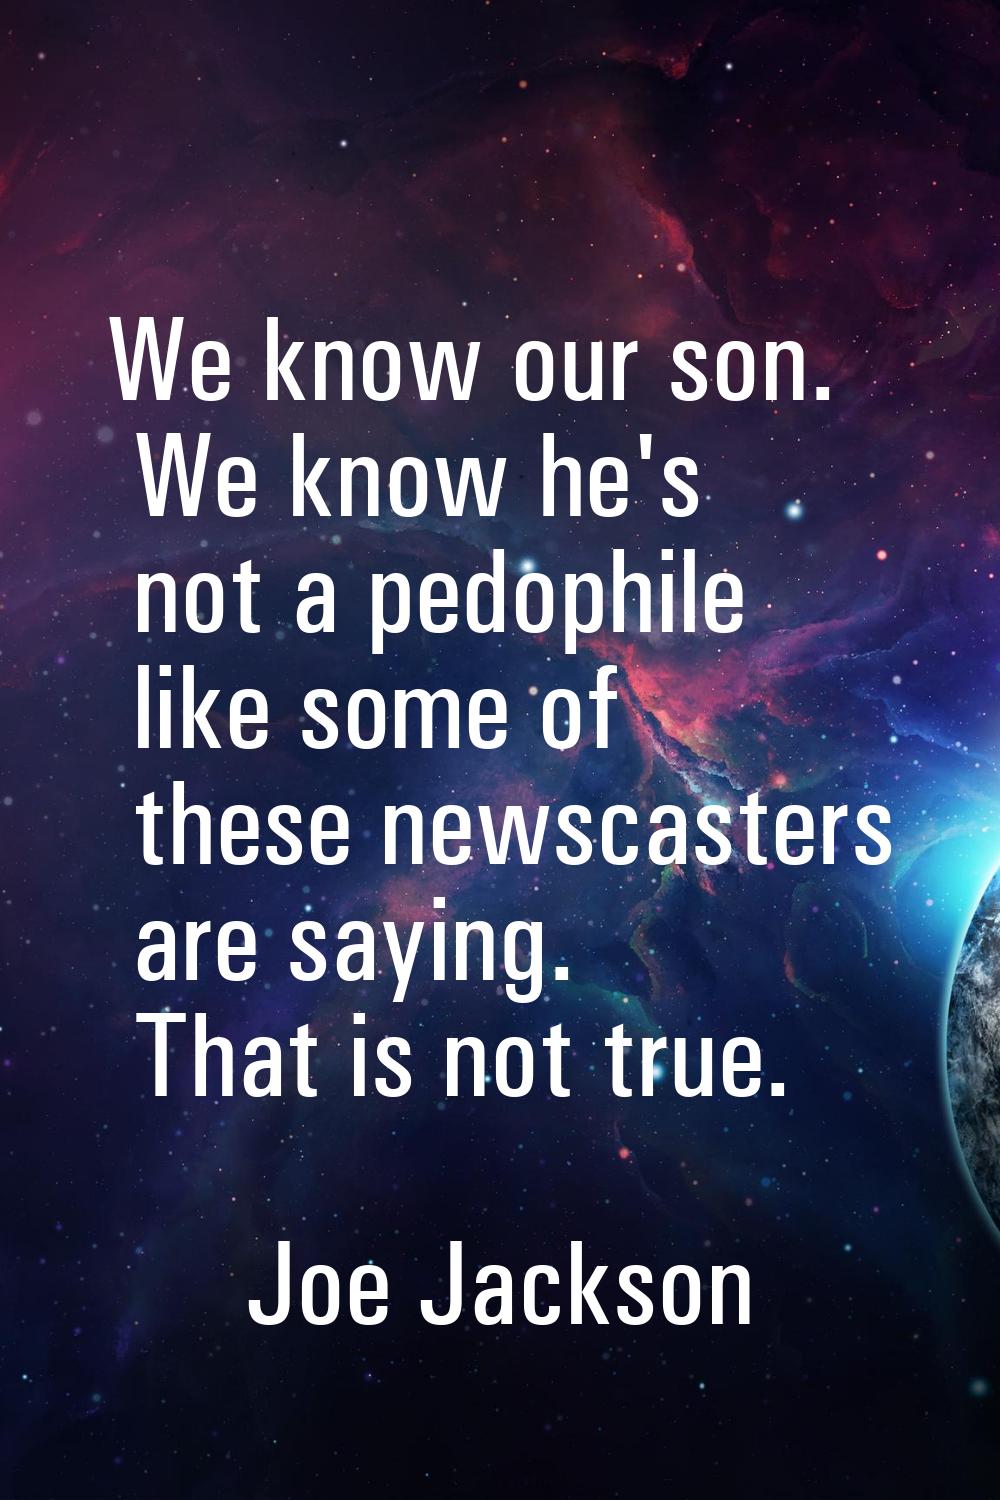 We know our son. We know he's not a pedophile like some of these newscasters are saying. That is no